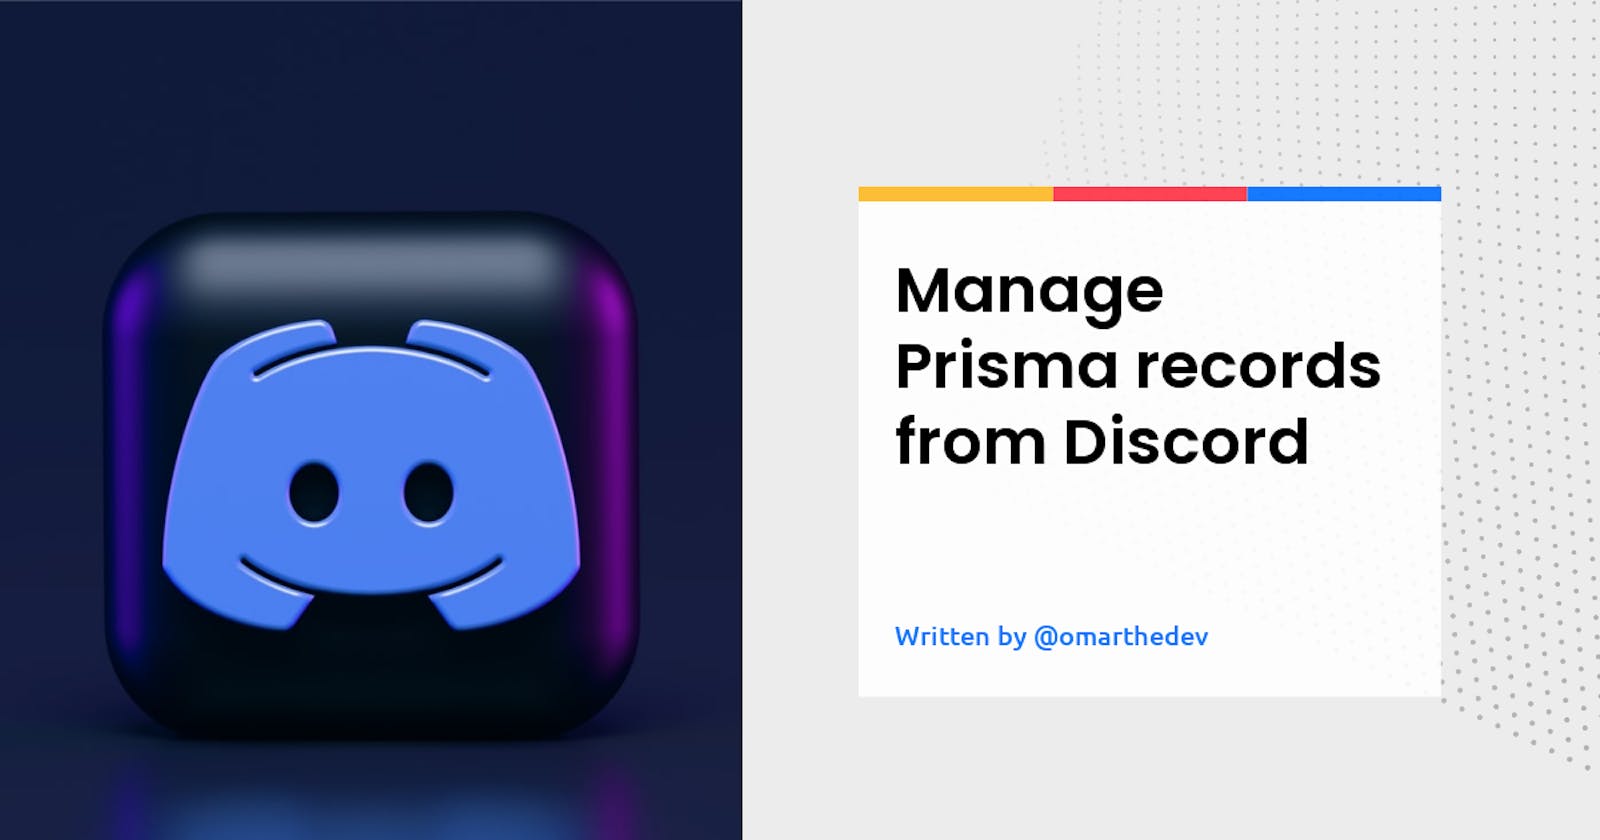 Manage Prisma records from Discord